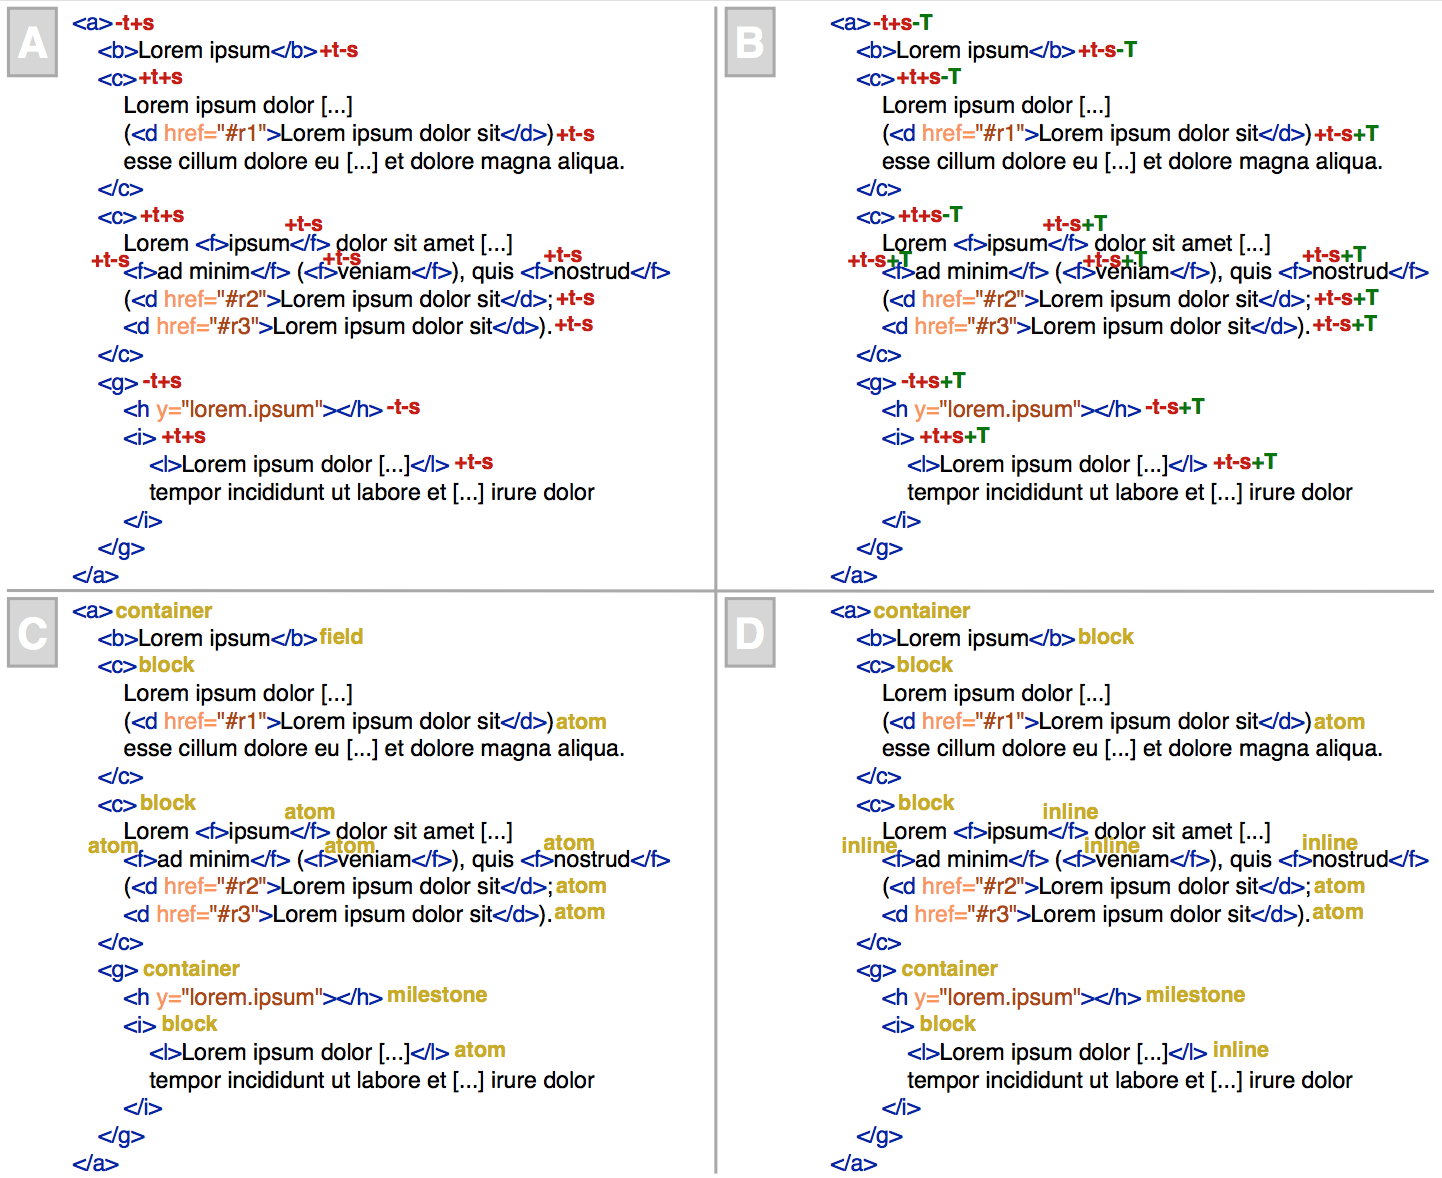 Four snapshots of the same excerpt of an XML document, describing the execution of the algorithm.